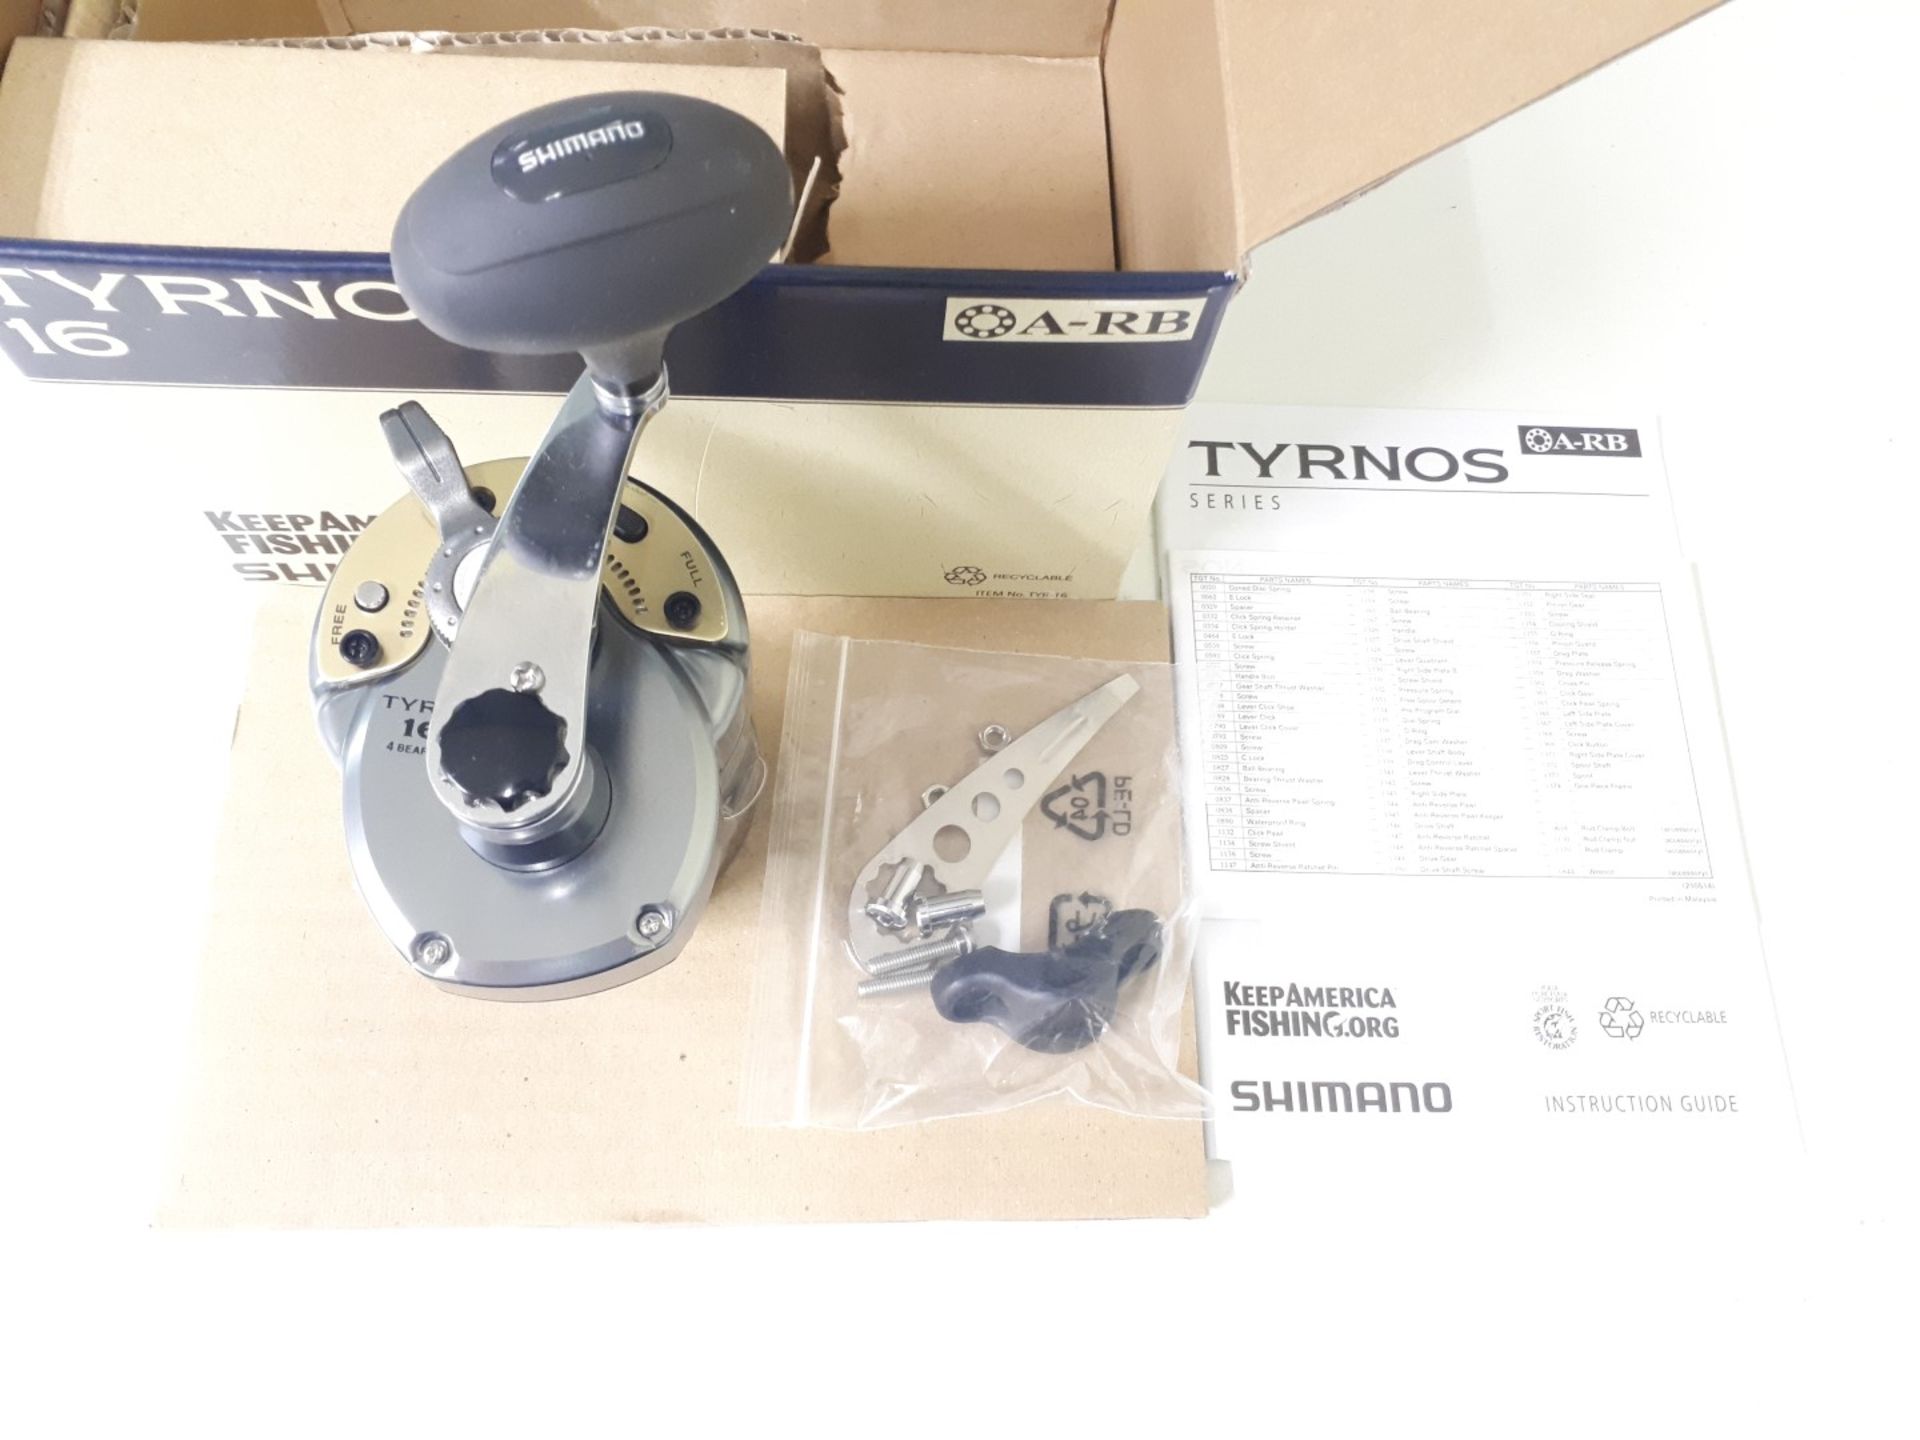 Shimano Tyrnos 16 Fishing Reel (New In Box) - Image 2 of 5